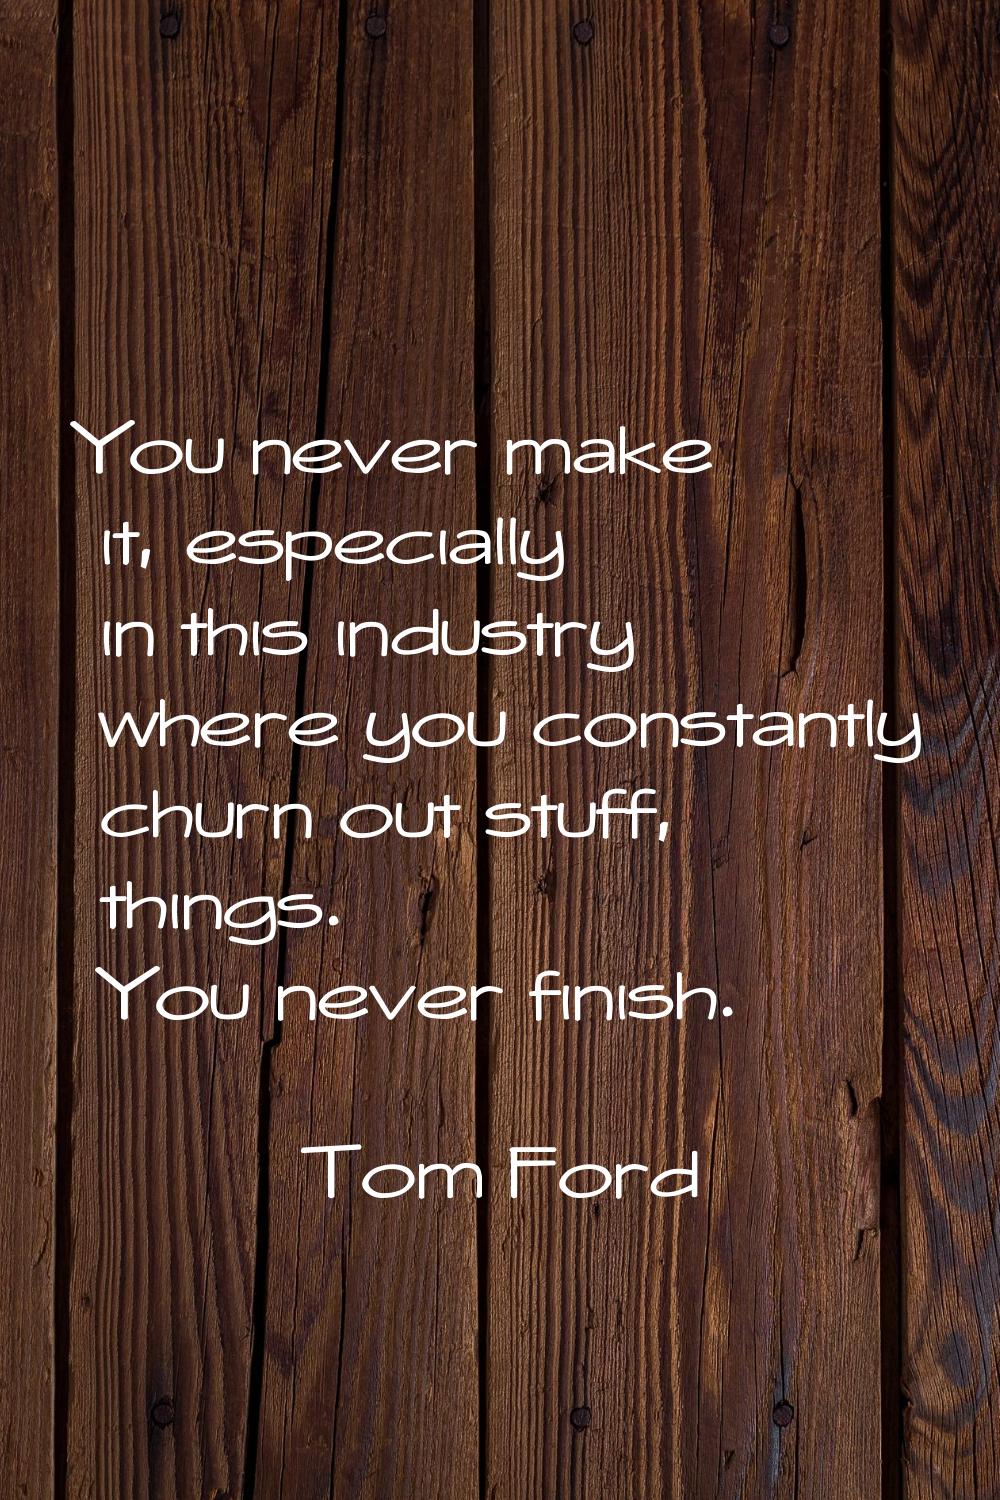 You never make it, especially in this industry where you constantly churn out stuff, things. You ne